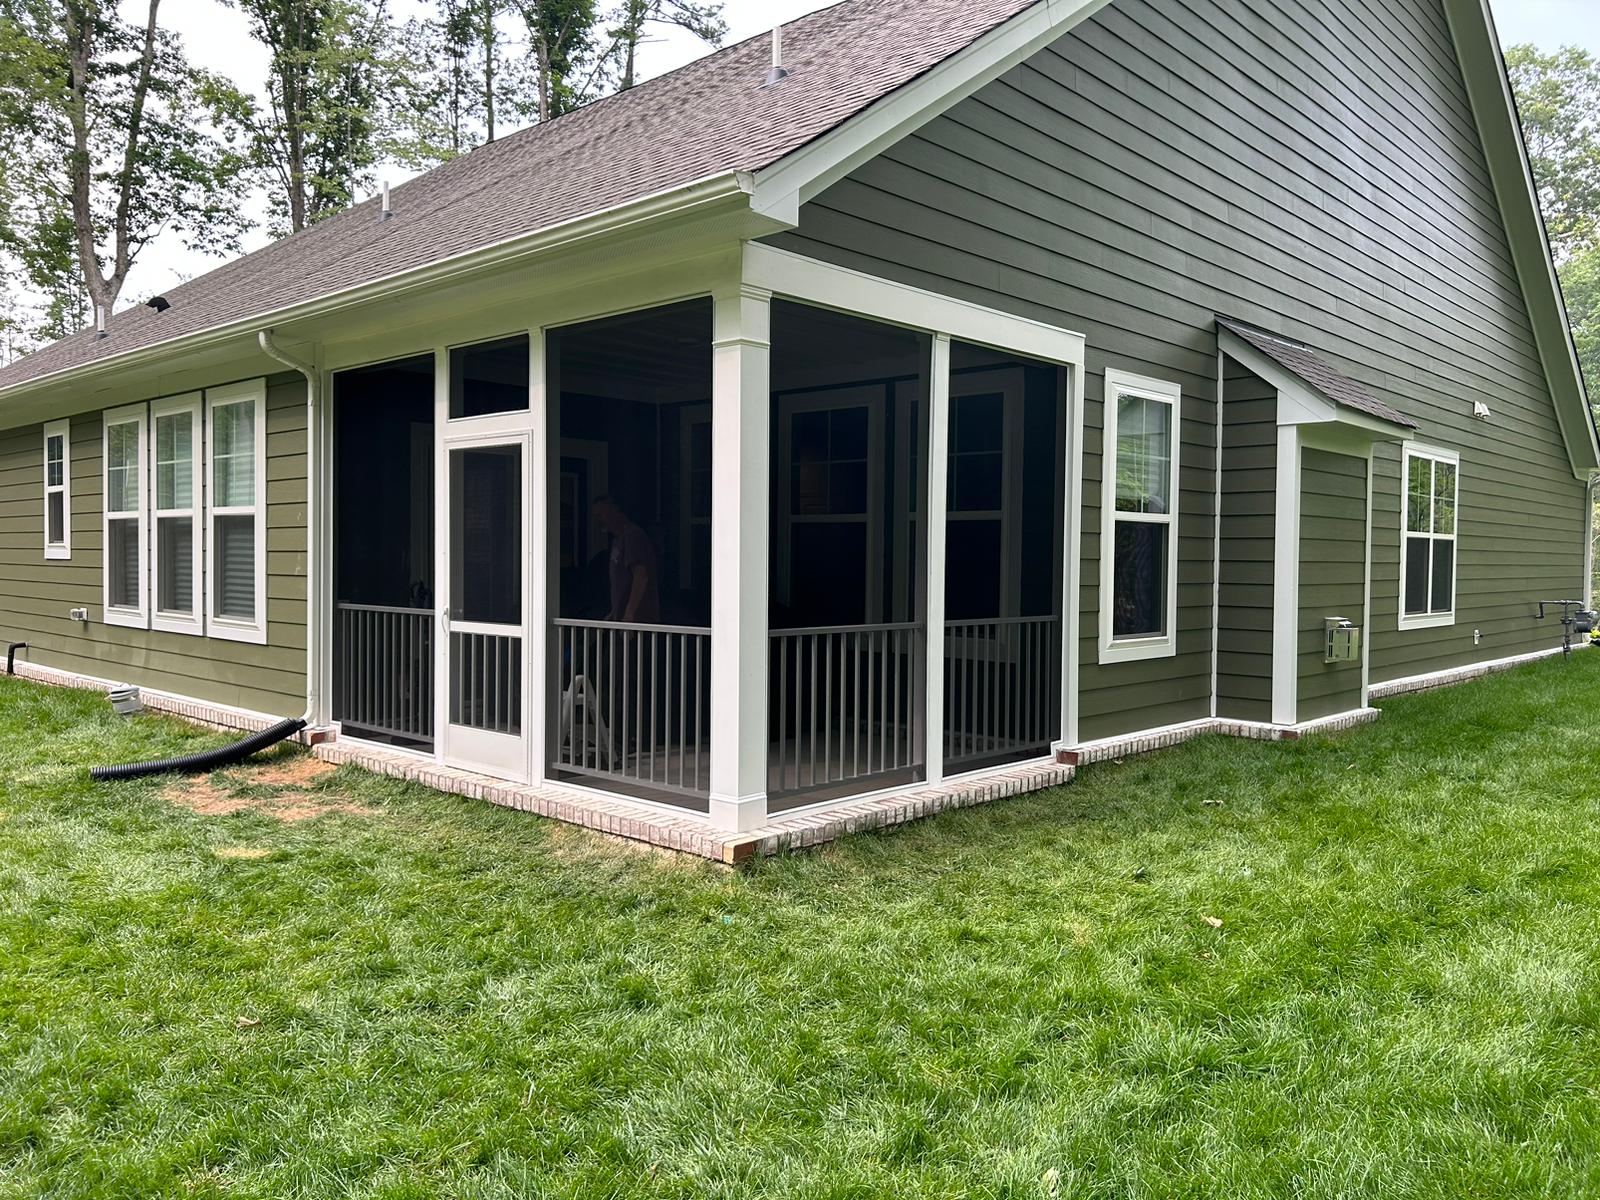 This project created a screened in porch from an existing rear patio. The rails were built with white Westbury composite wood for a home in Chesterfield, VA